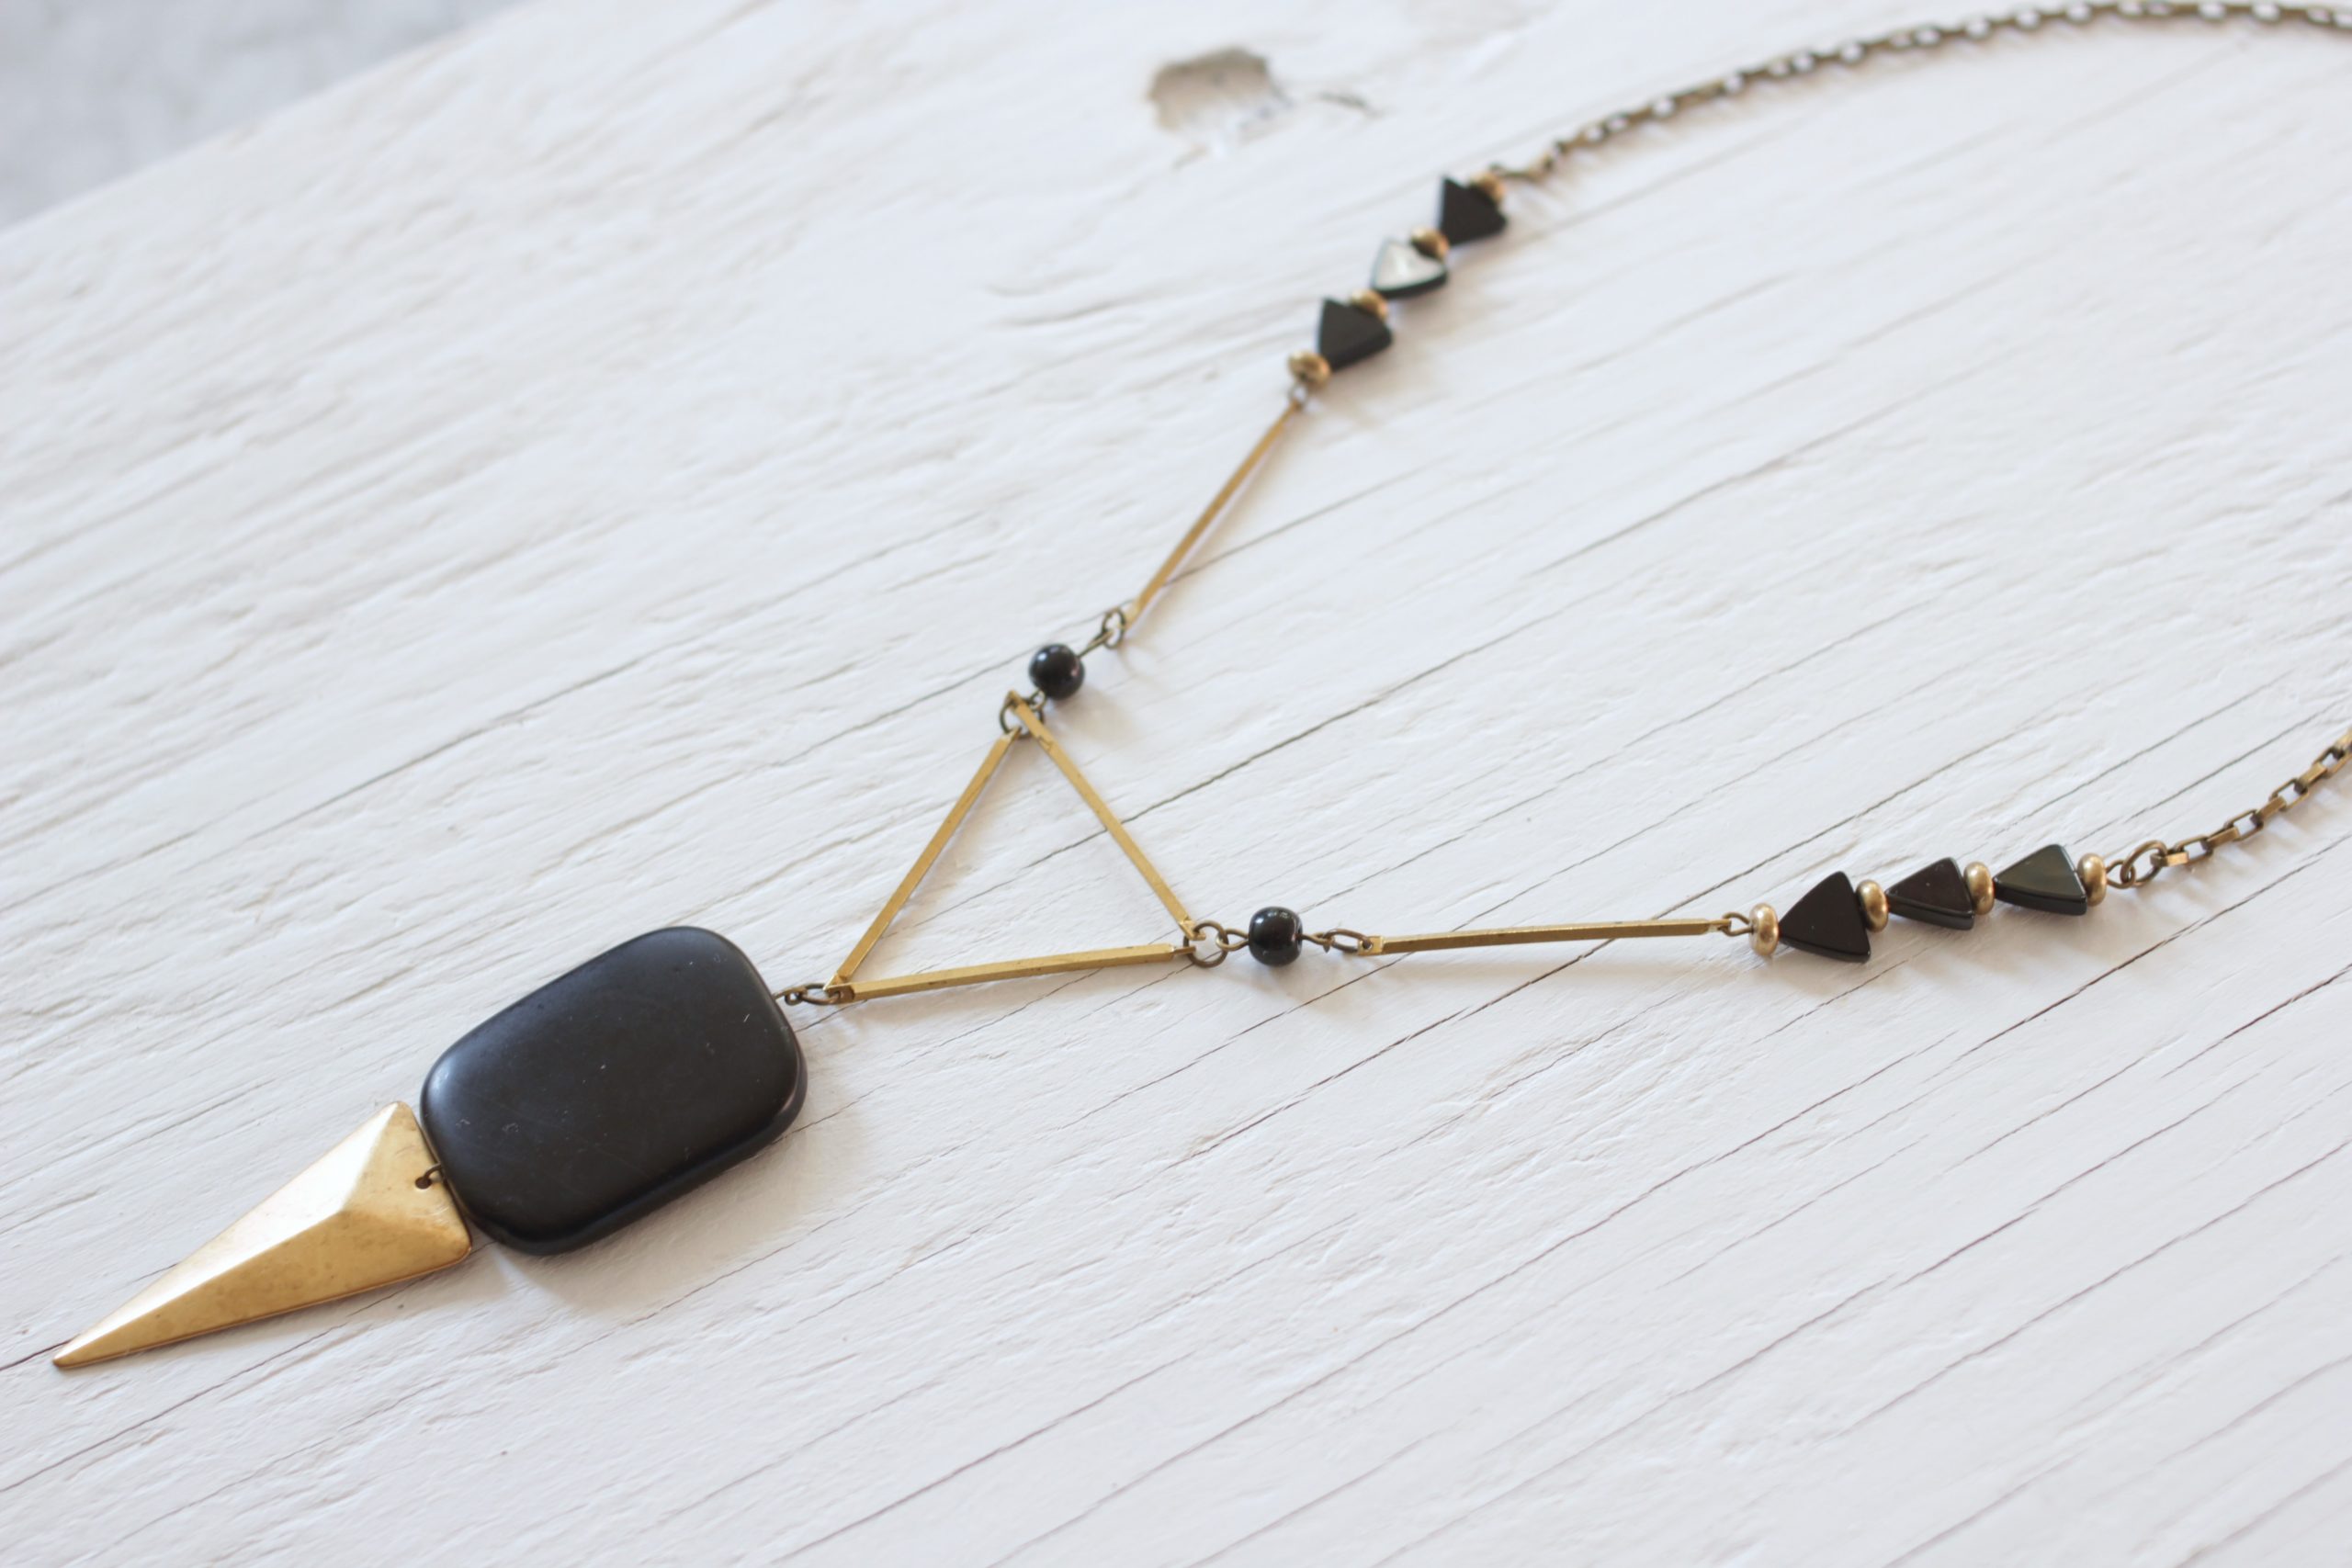 Black geometric necklace made with onyx stones and brass components and chain